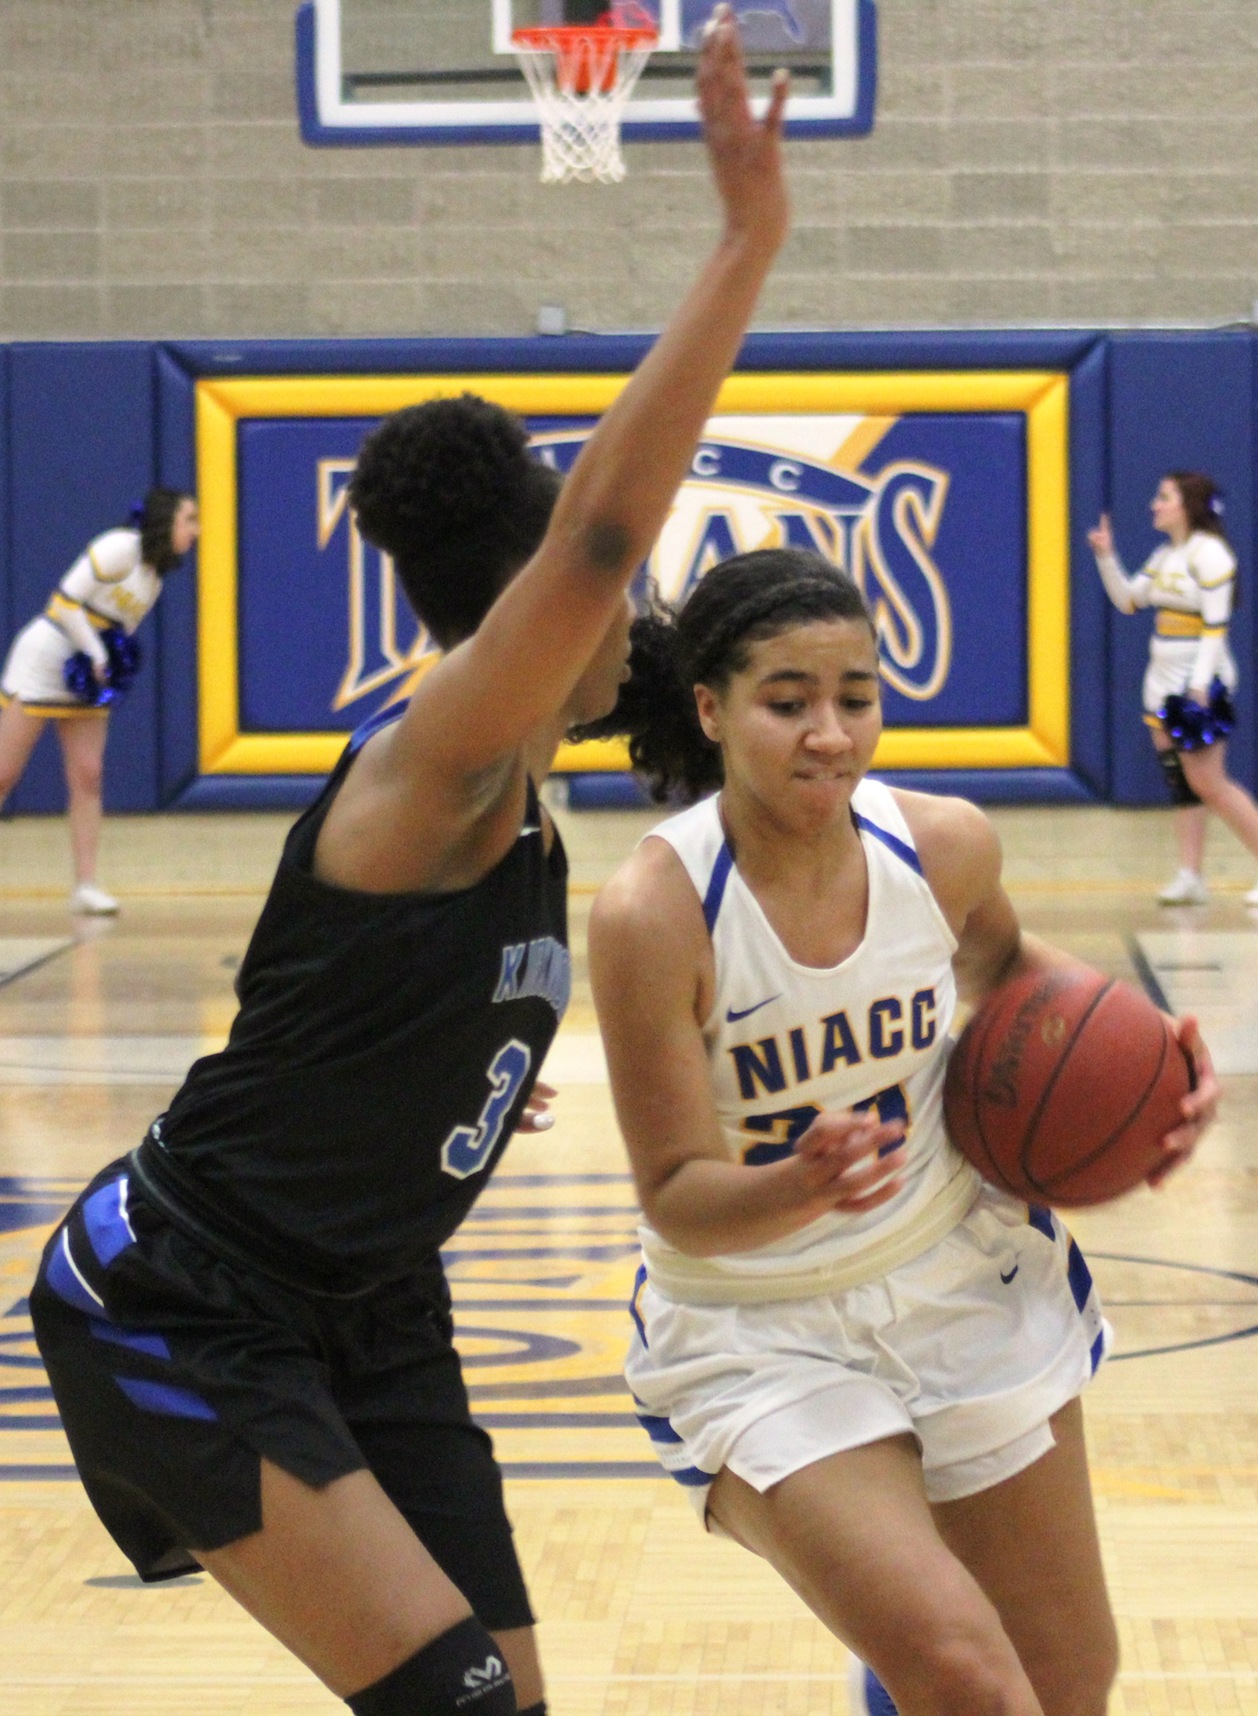 NIACC's Tahya Campbell drives to the basket in Saturday's game against Kirkwood.